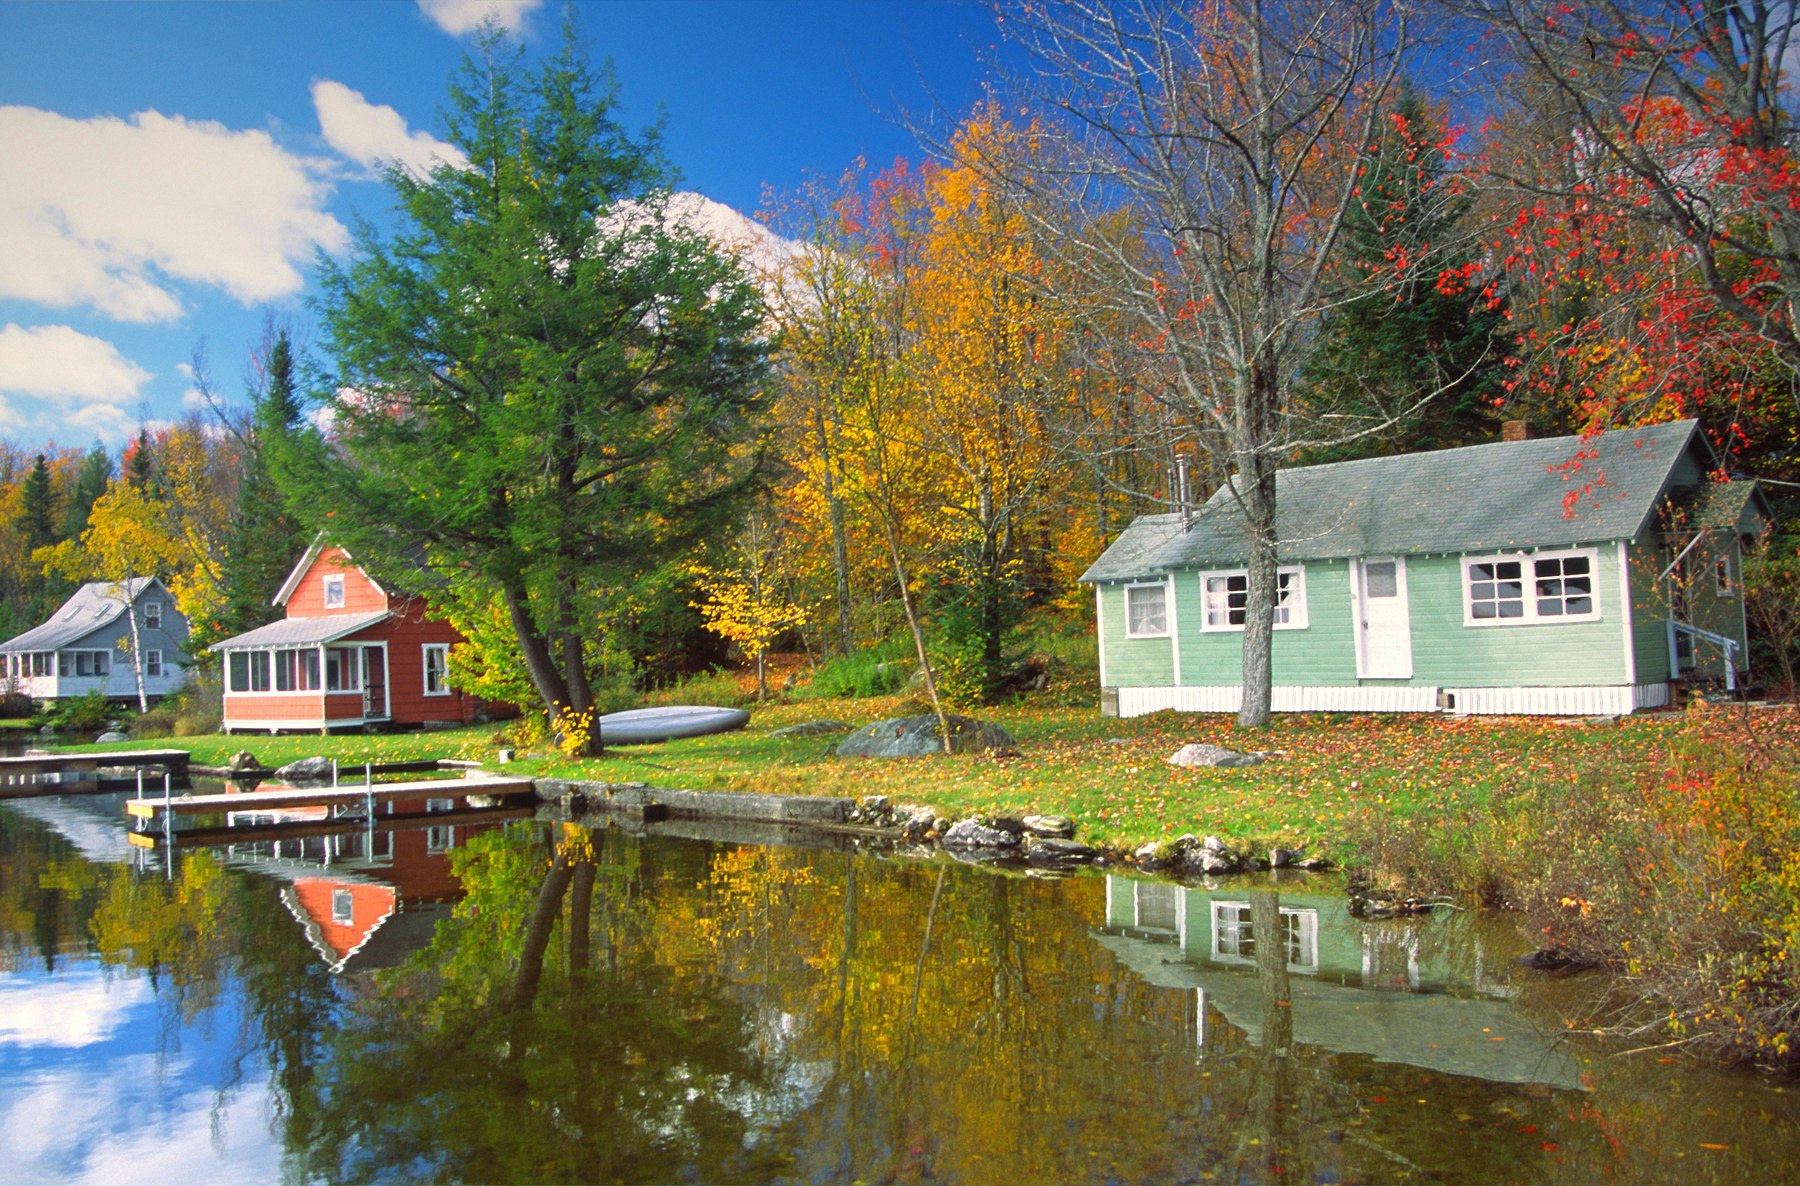 Cottages along a small lake in the Northeast Kingdom of Vermont.